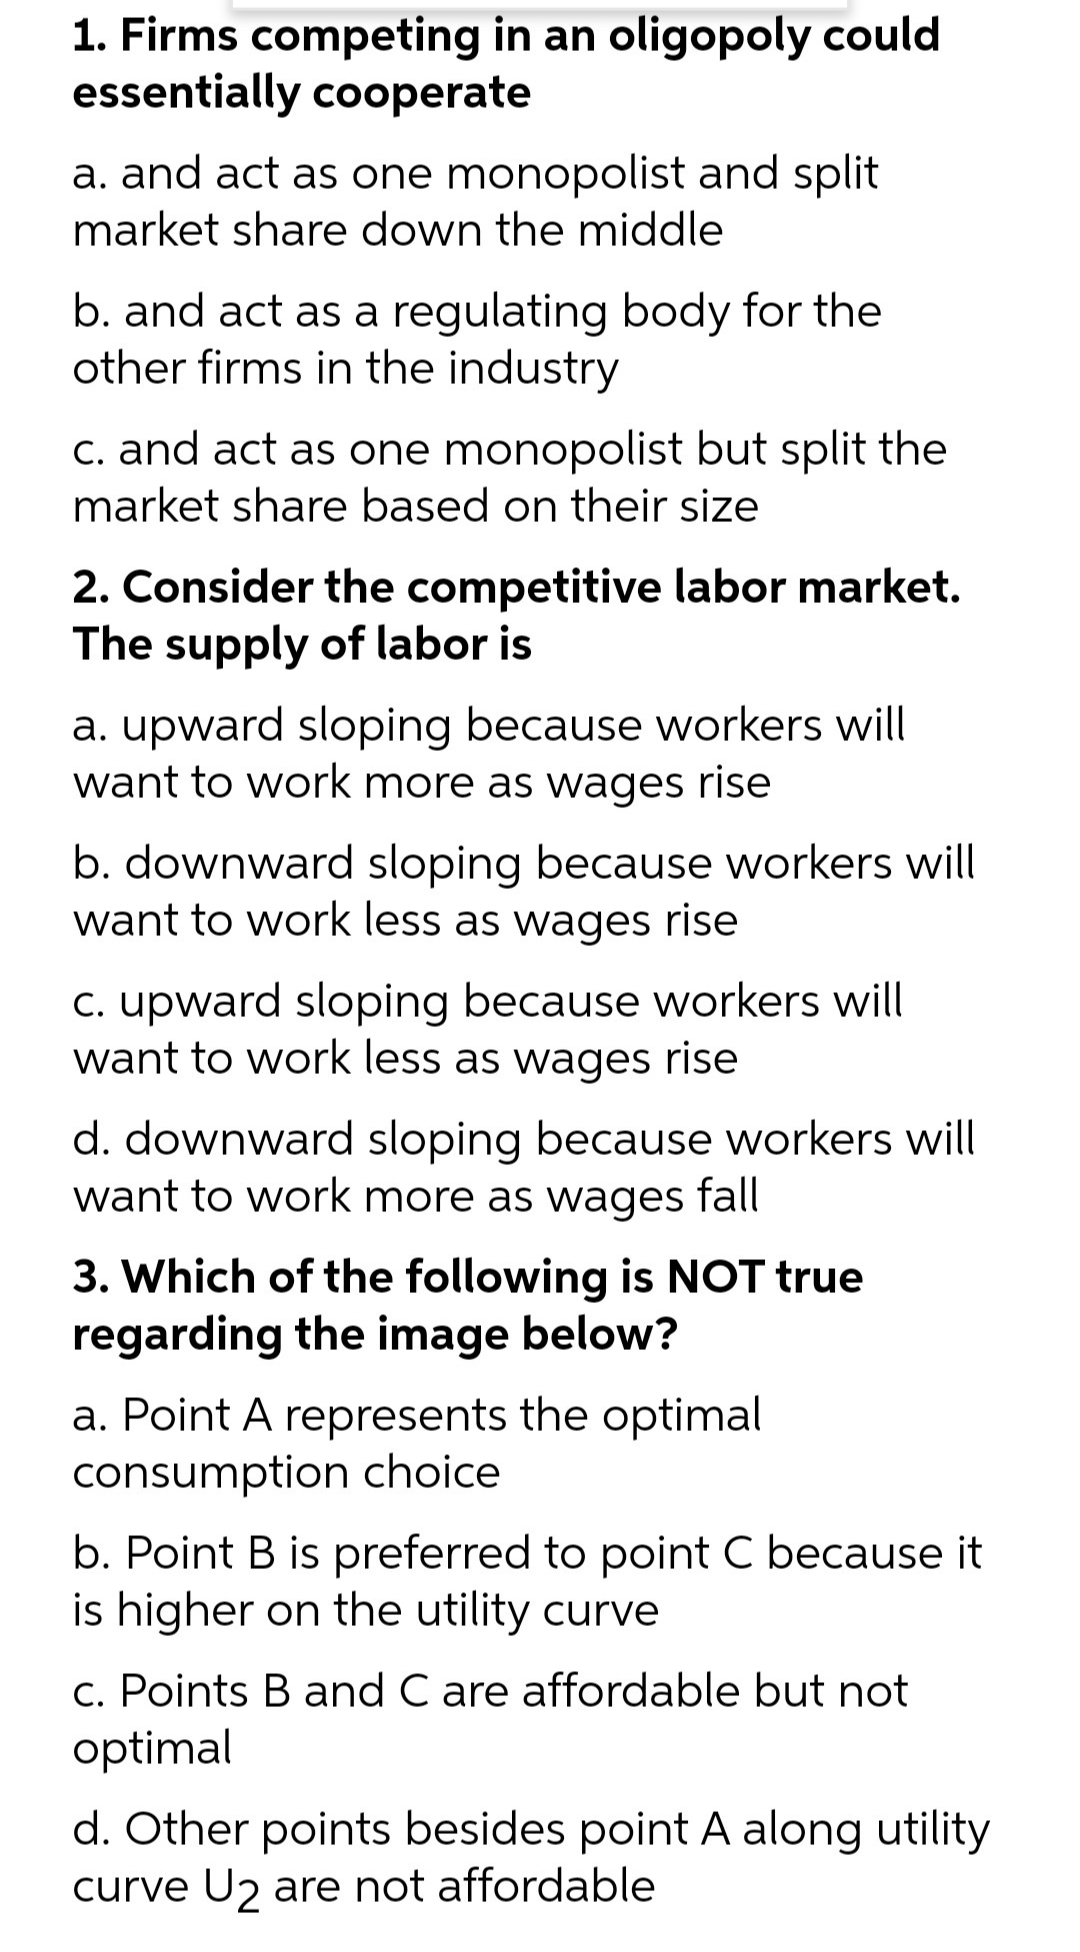 1. Firms competing in an oligopoly could
essentially cooperate
a. and act as one monopolist and split
market share down the middle
b. and act as a regulating body for the
other firms in the industry
C. and act as one monopolist but split the
market share based on their size
2. Consider the competitive labor market.
The supply of labor is
a. upward sloping because workers will
want to work more as wages rise
b. downward sloping because workers will
want to work less as wages rise
C. upward sloping because workers will
want to work less as wages rise
d. downward sloping because workers will
want to work more as wages fall
3. Which of the following is NOT true
regarding the image below?
a. Point A represents the optimal
consumption choice
b. Point B is preferred to point C because it
is higher on the utility curve
c. Points B and C are affordable but not
optimal
d. Other points besides point A along utility
curve U2 are not affordable
